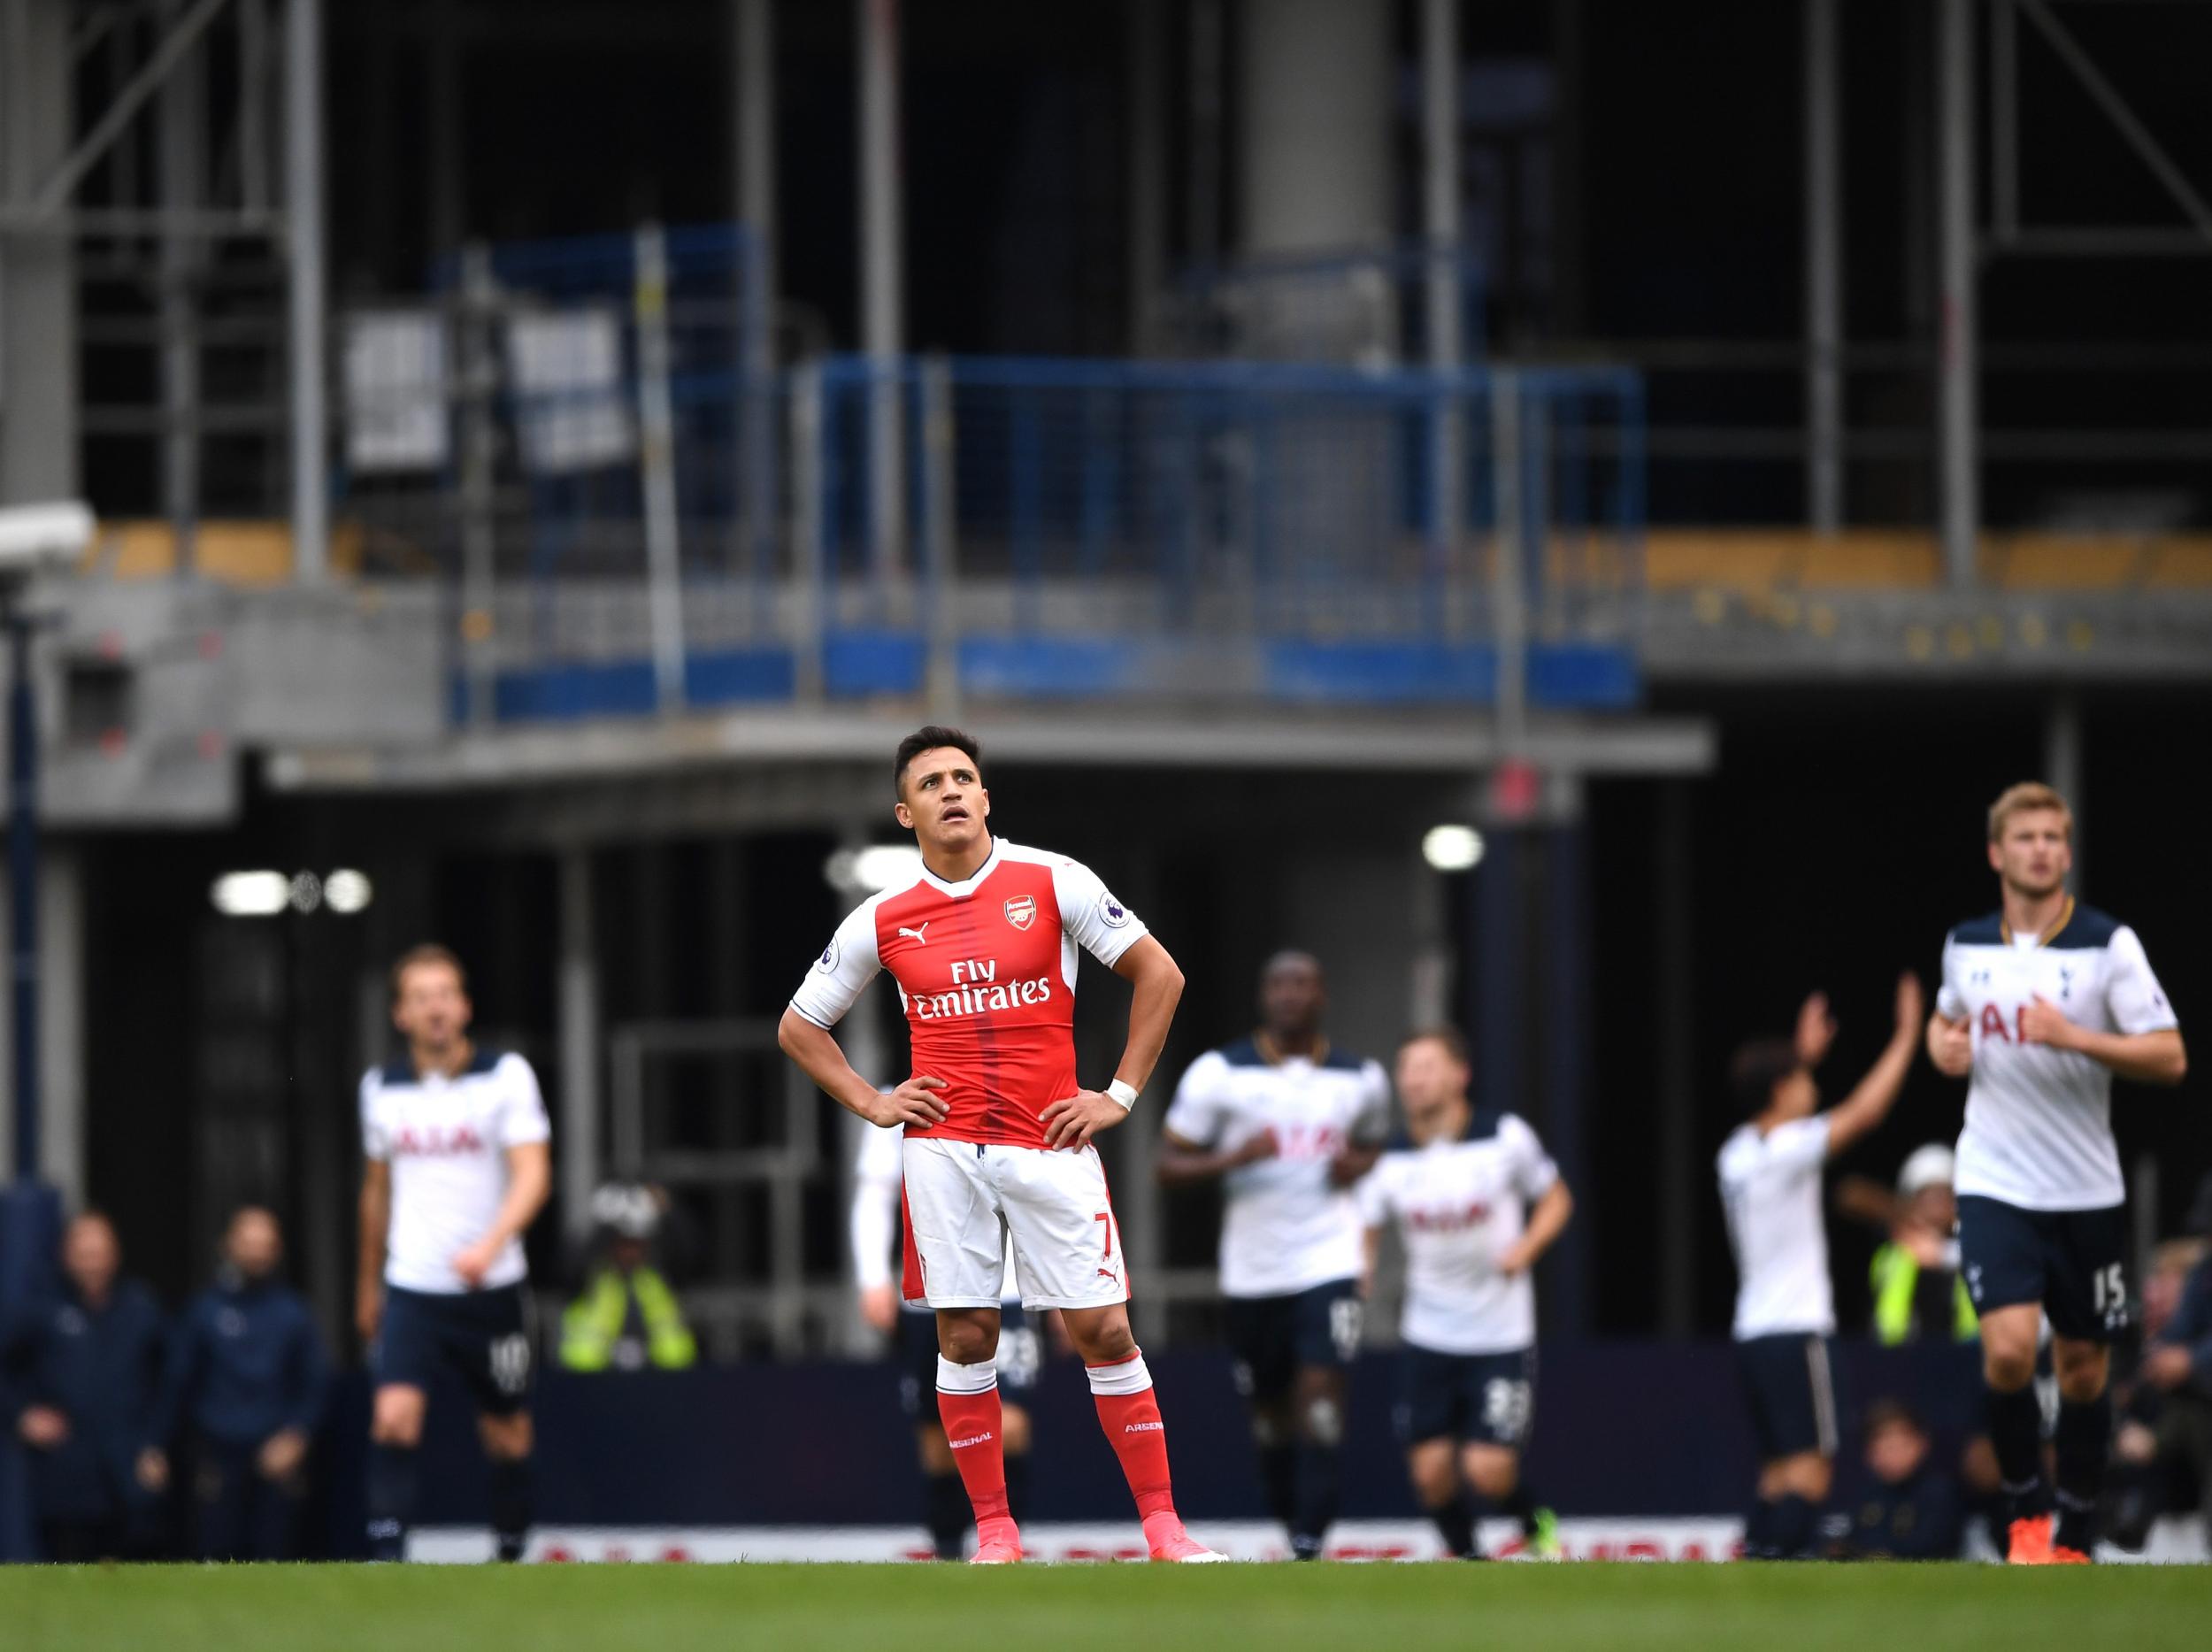 Sanchez stands dejected as Spurs celebrate their second